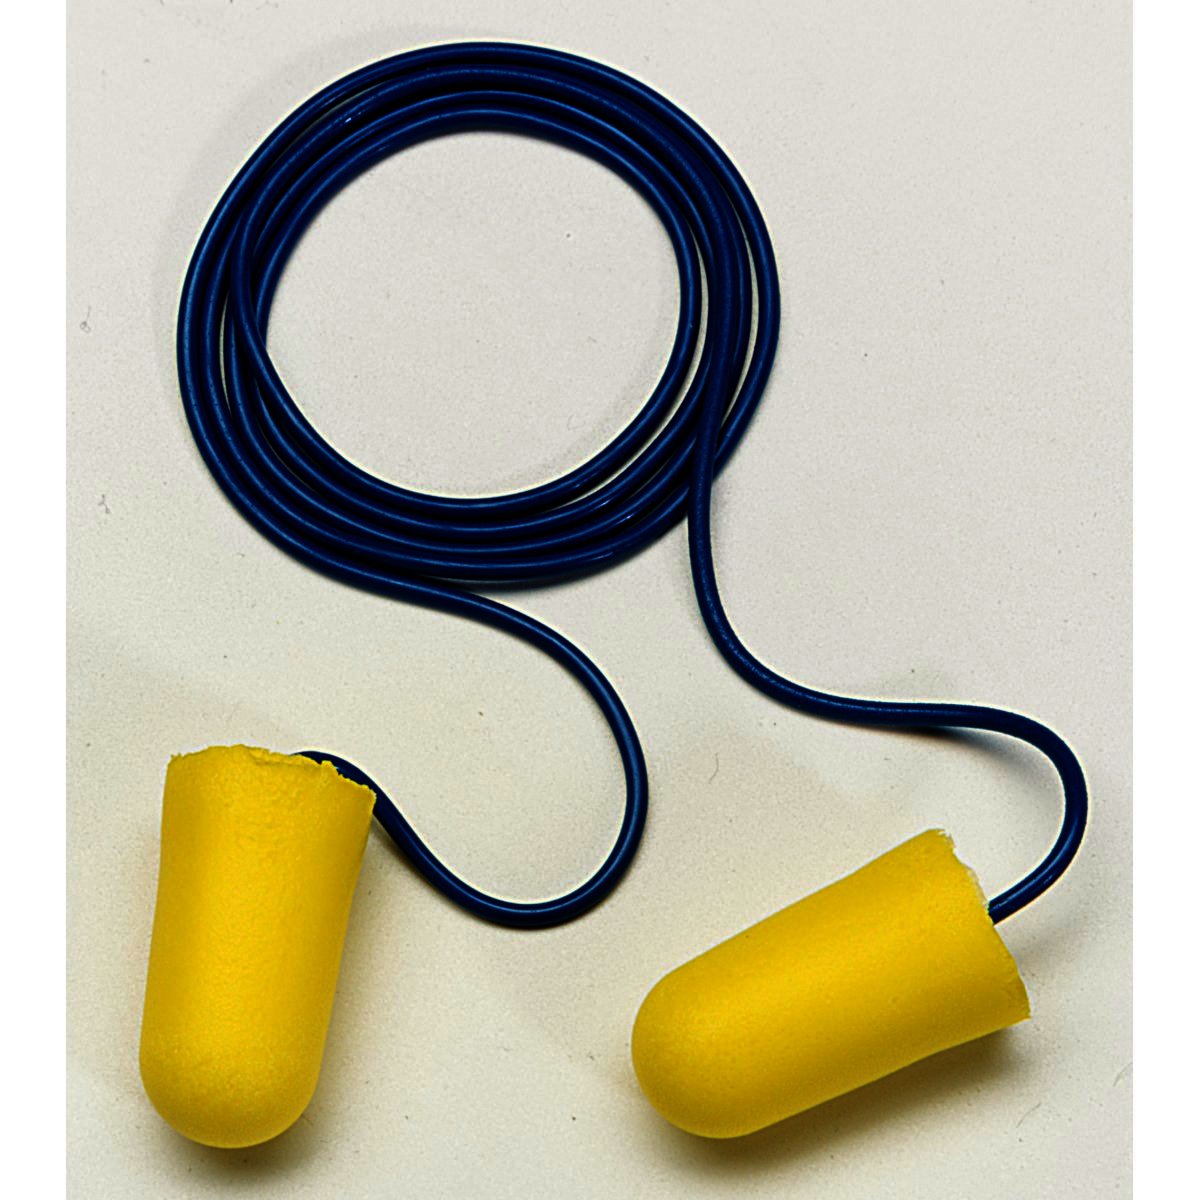 3M™ E-A-R™ TaperFit™ 2 Earplugs 312-1224, Corded, Large Size